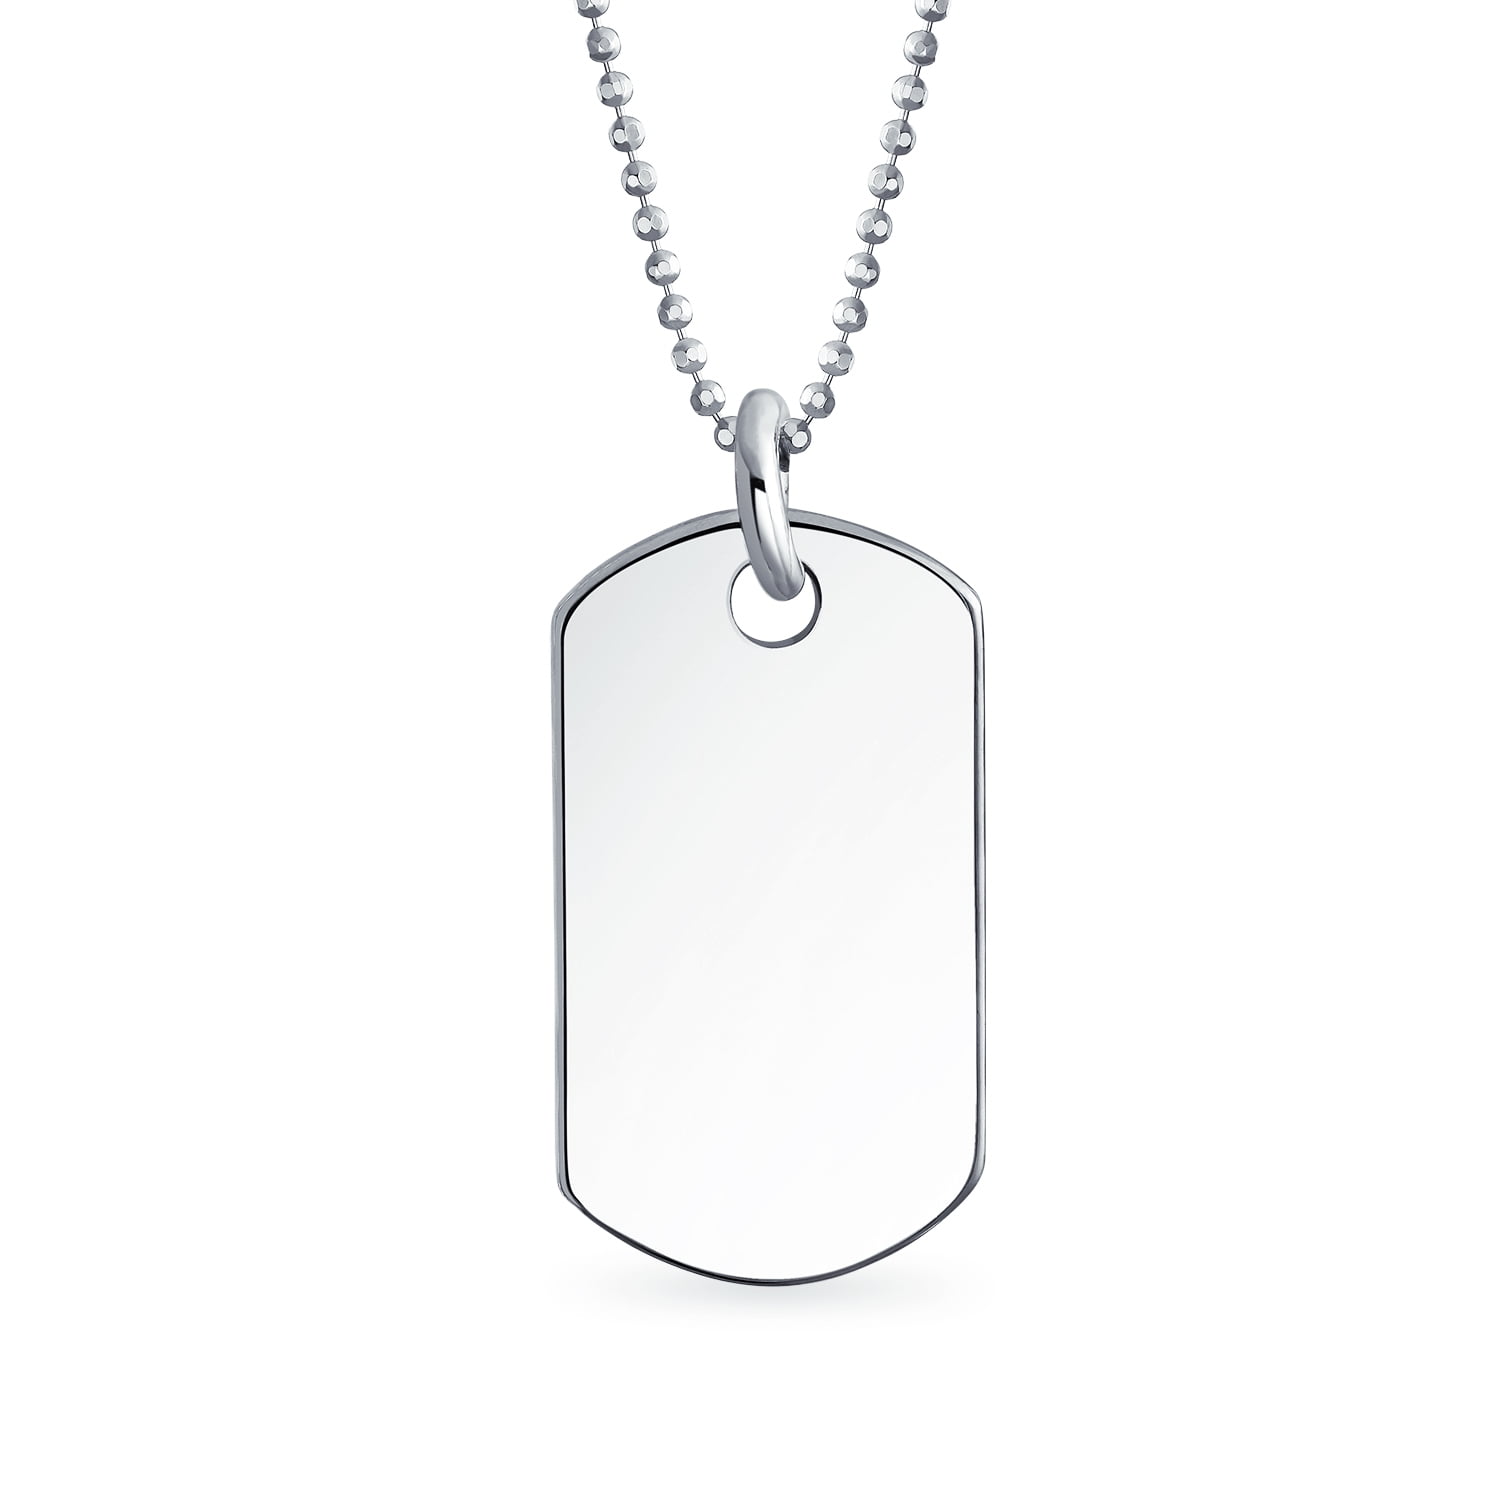 Dog Tag Pendant Necklace in Sterling Silver with Chain